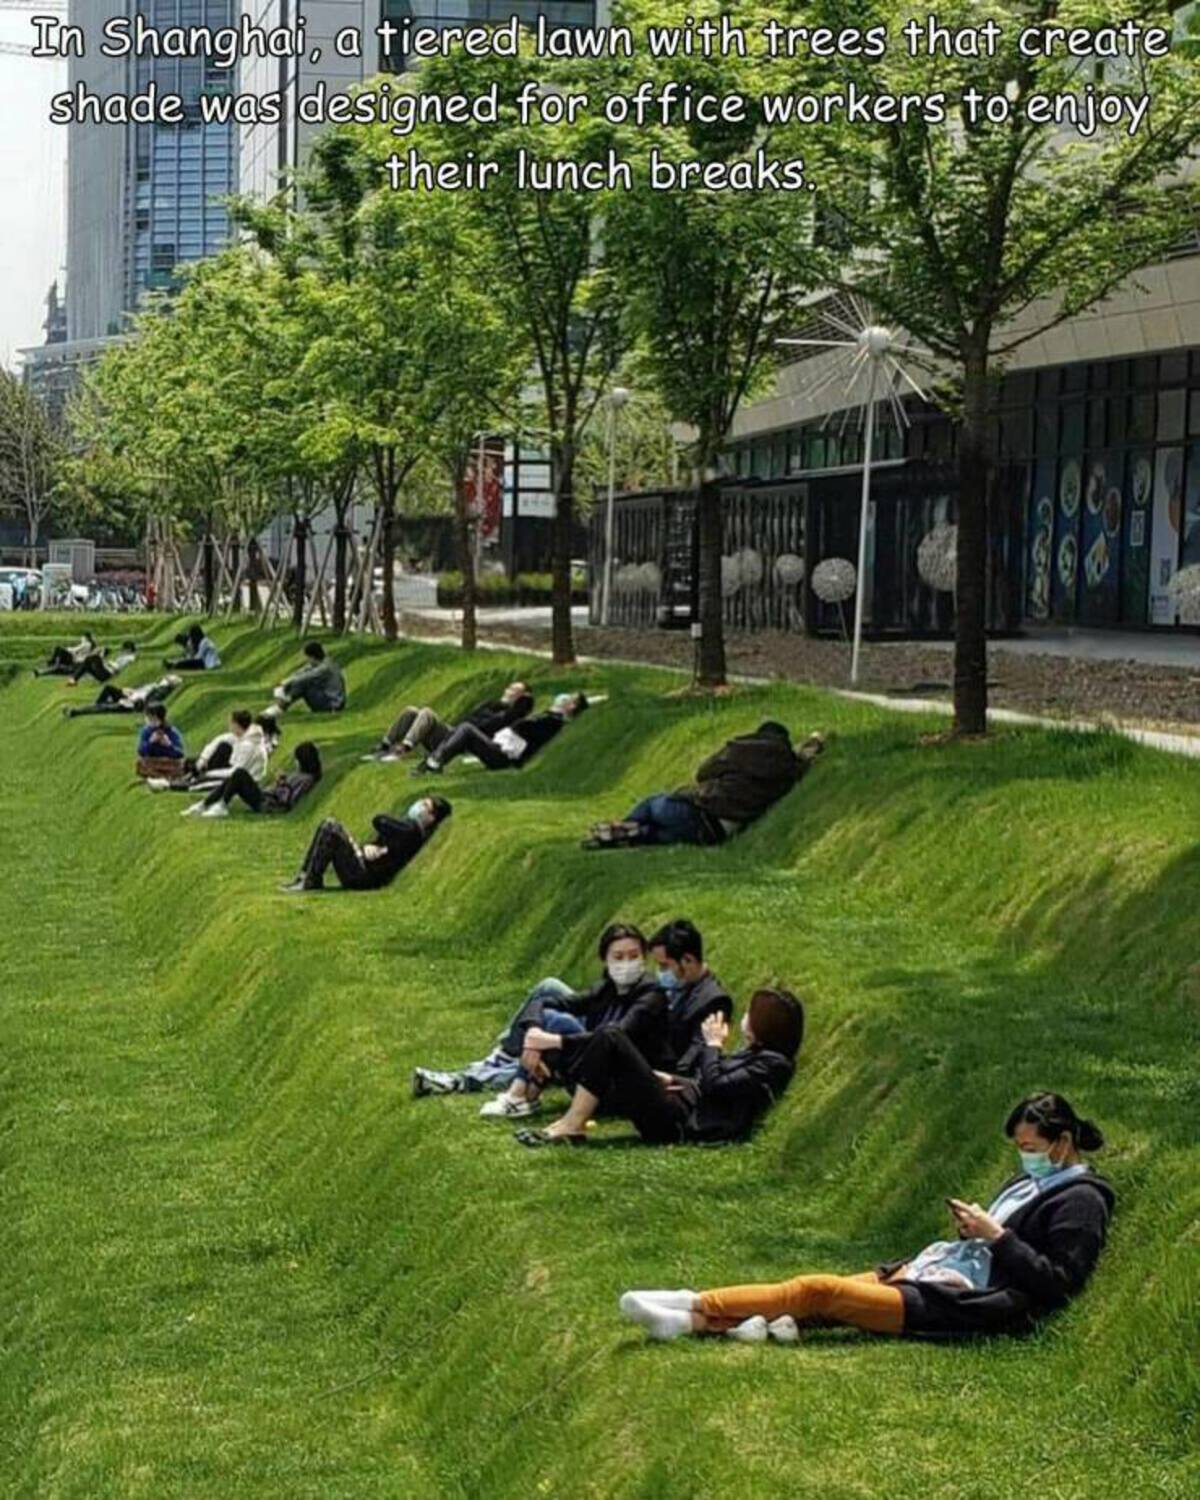 Shanghai - In Shanghai, a tiered lawn with trees that create shade was designed for office workers to enjoy their lunch breaks.